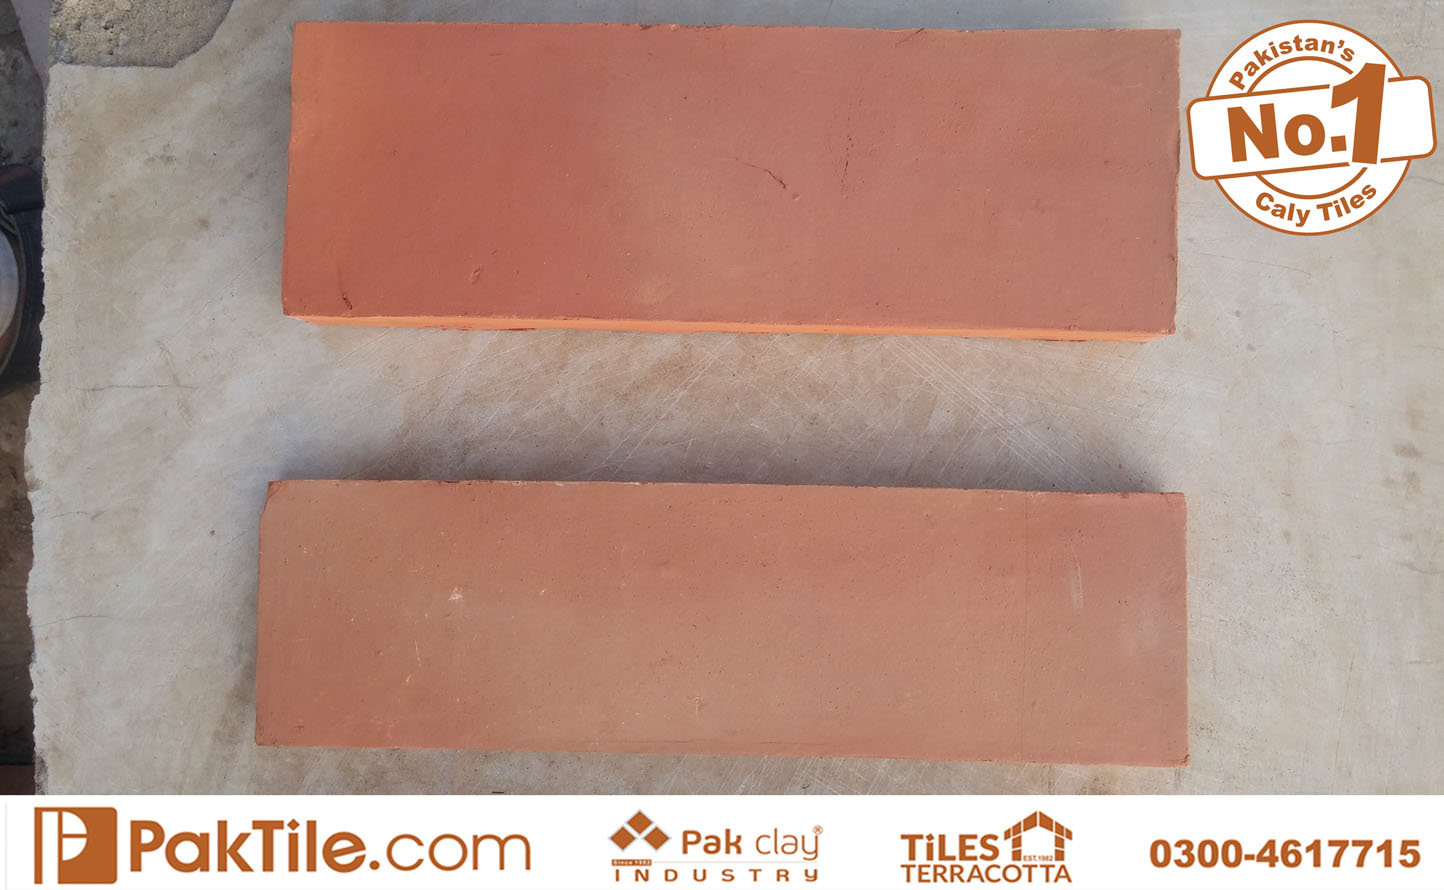 3 Pak Clay Big Size 9 Inch Gas Brick Face Tiles Patterns Factory Prices in Gujranwala